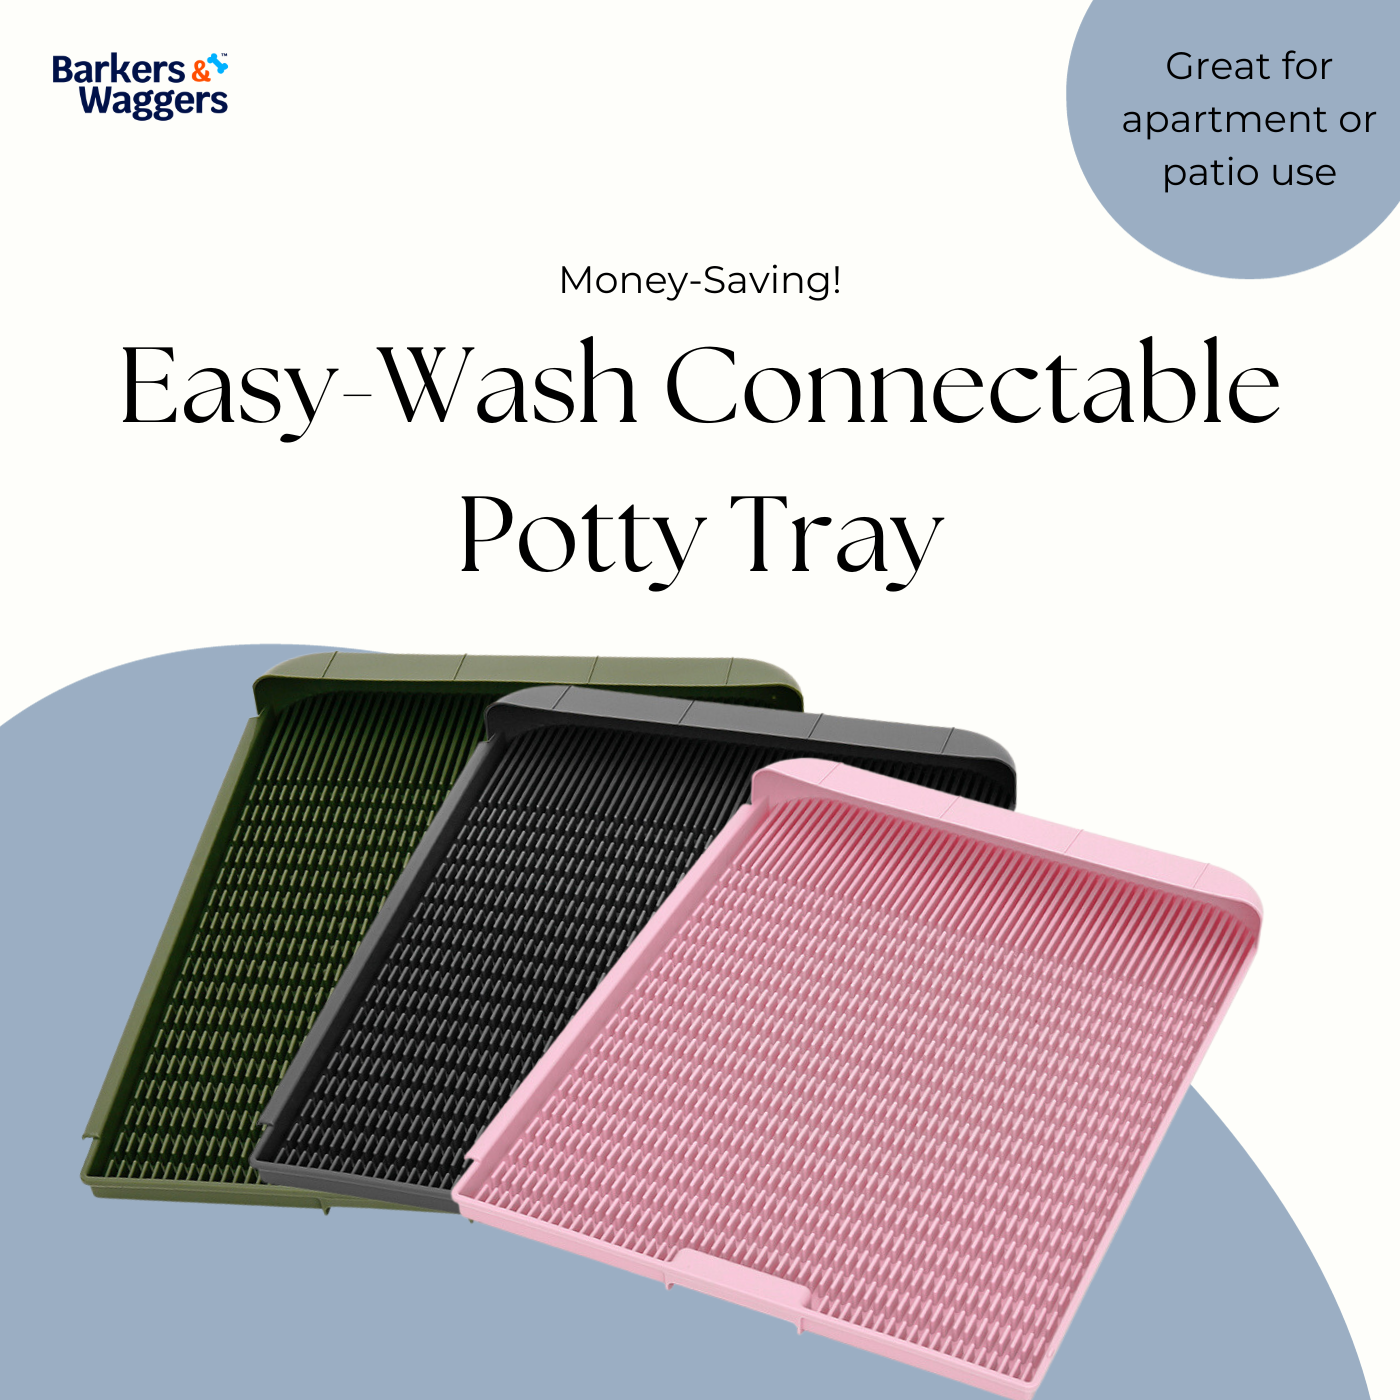 Easy-Wash Connectable Dog Puppy Potty Tray for Indoor or Patio Use (Reusable)